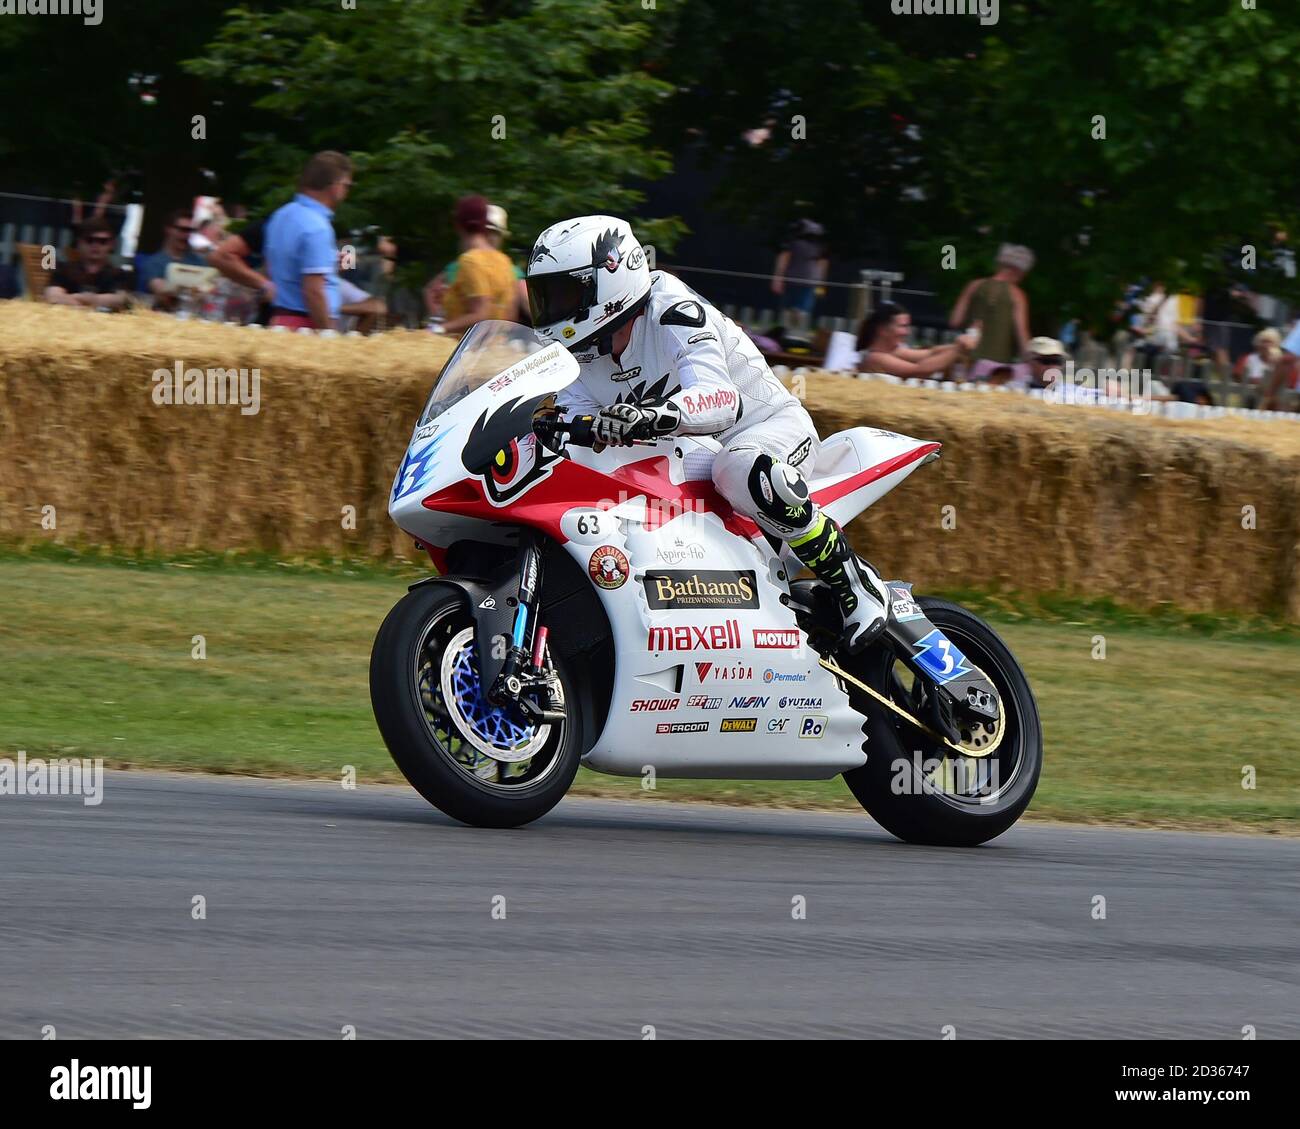 Bruce Anstey, Mugen Shinden Go, moto elettrico, motociclette da corsa moderne, motociclette da corsa classiche, Goodwood Festival of Speed, Speed Kings, M. Foto Stock